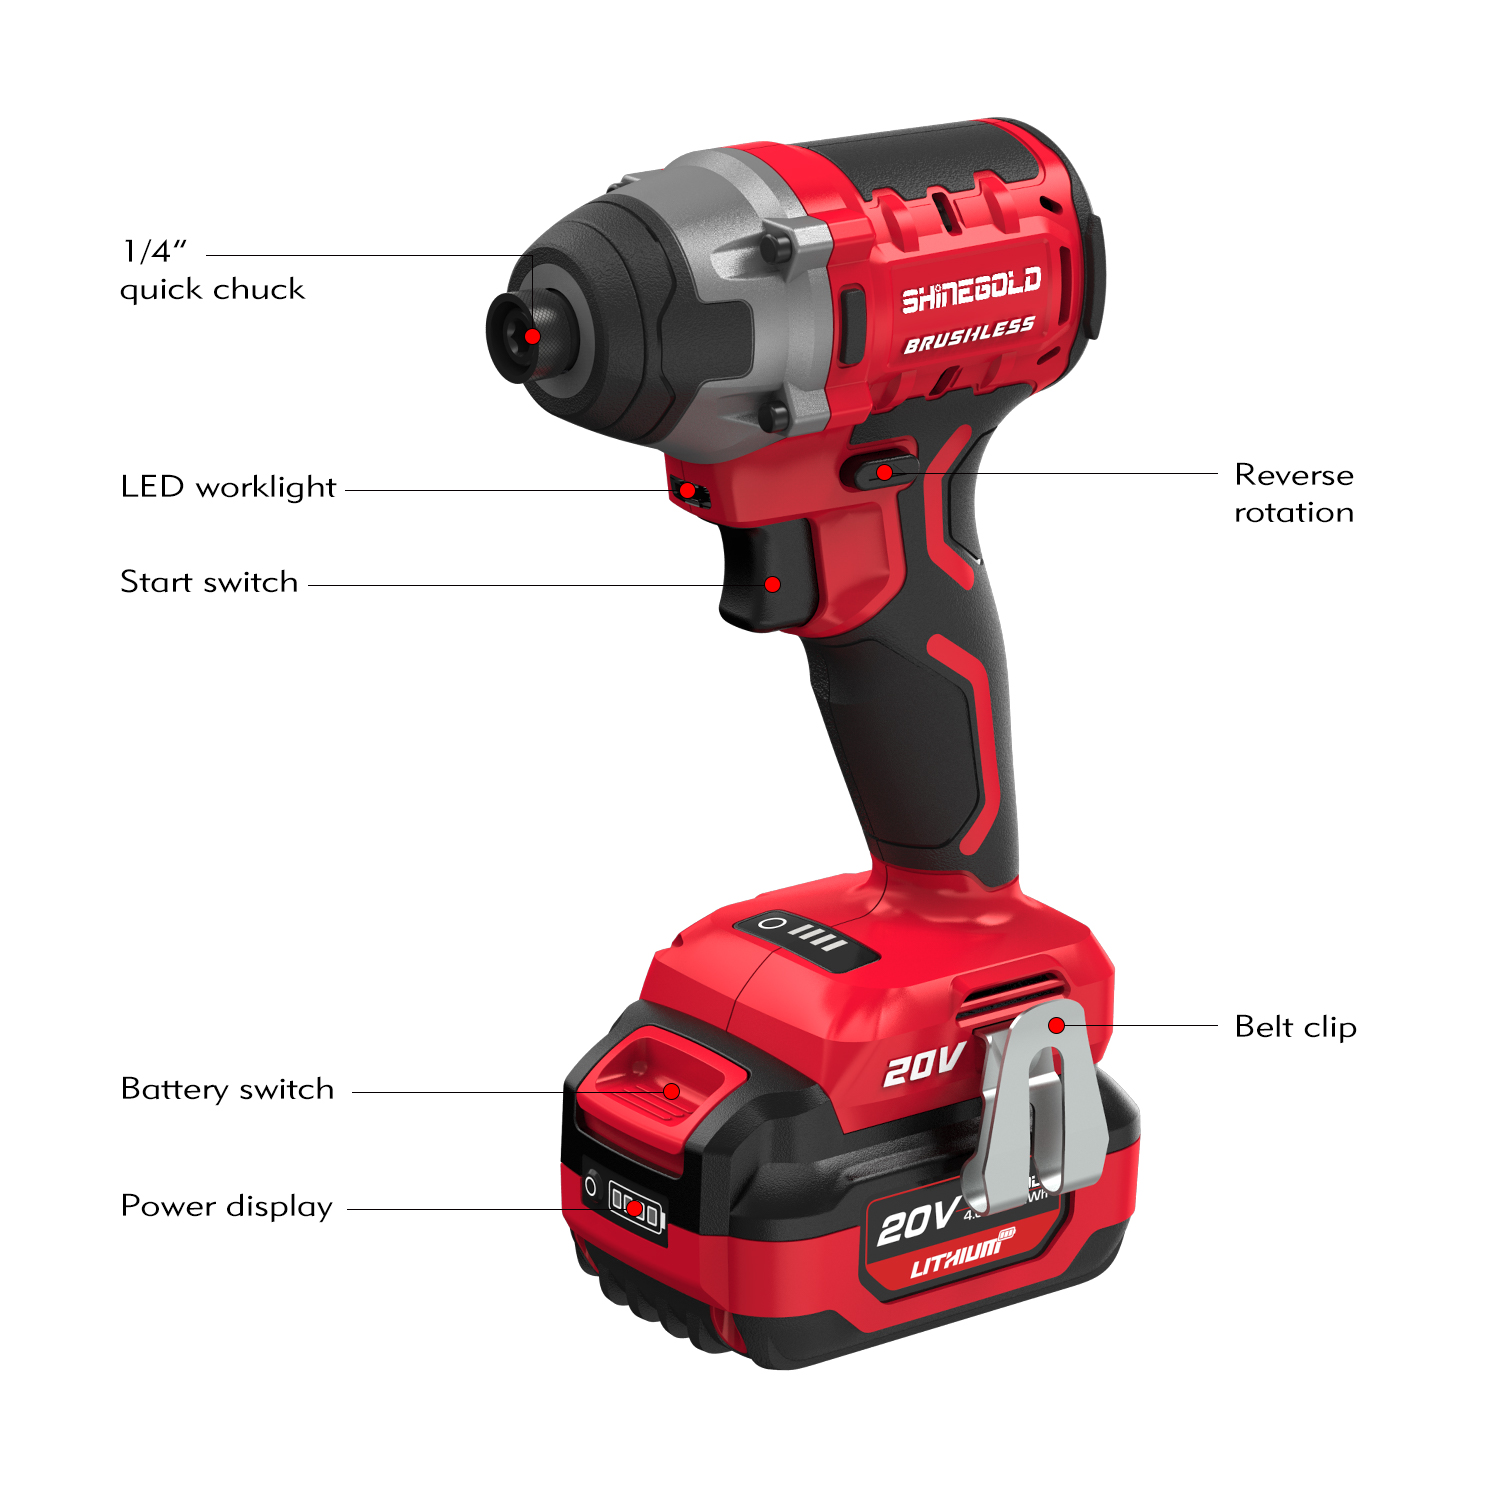 High Quality Power Tools 2800 Rpm Per Min No Load Speed 20V Cordless Brushless Screw Driver Machine